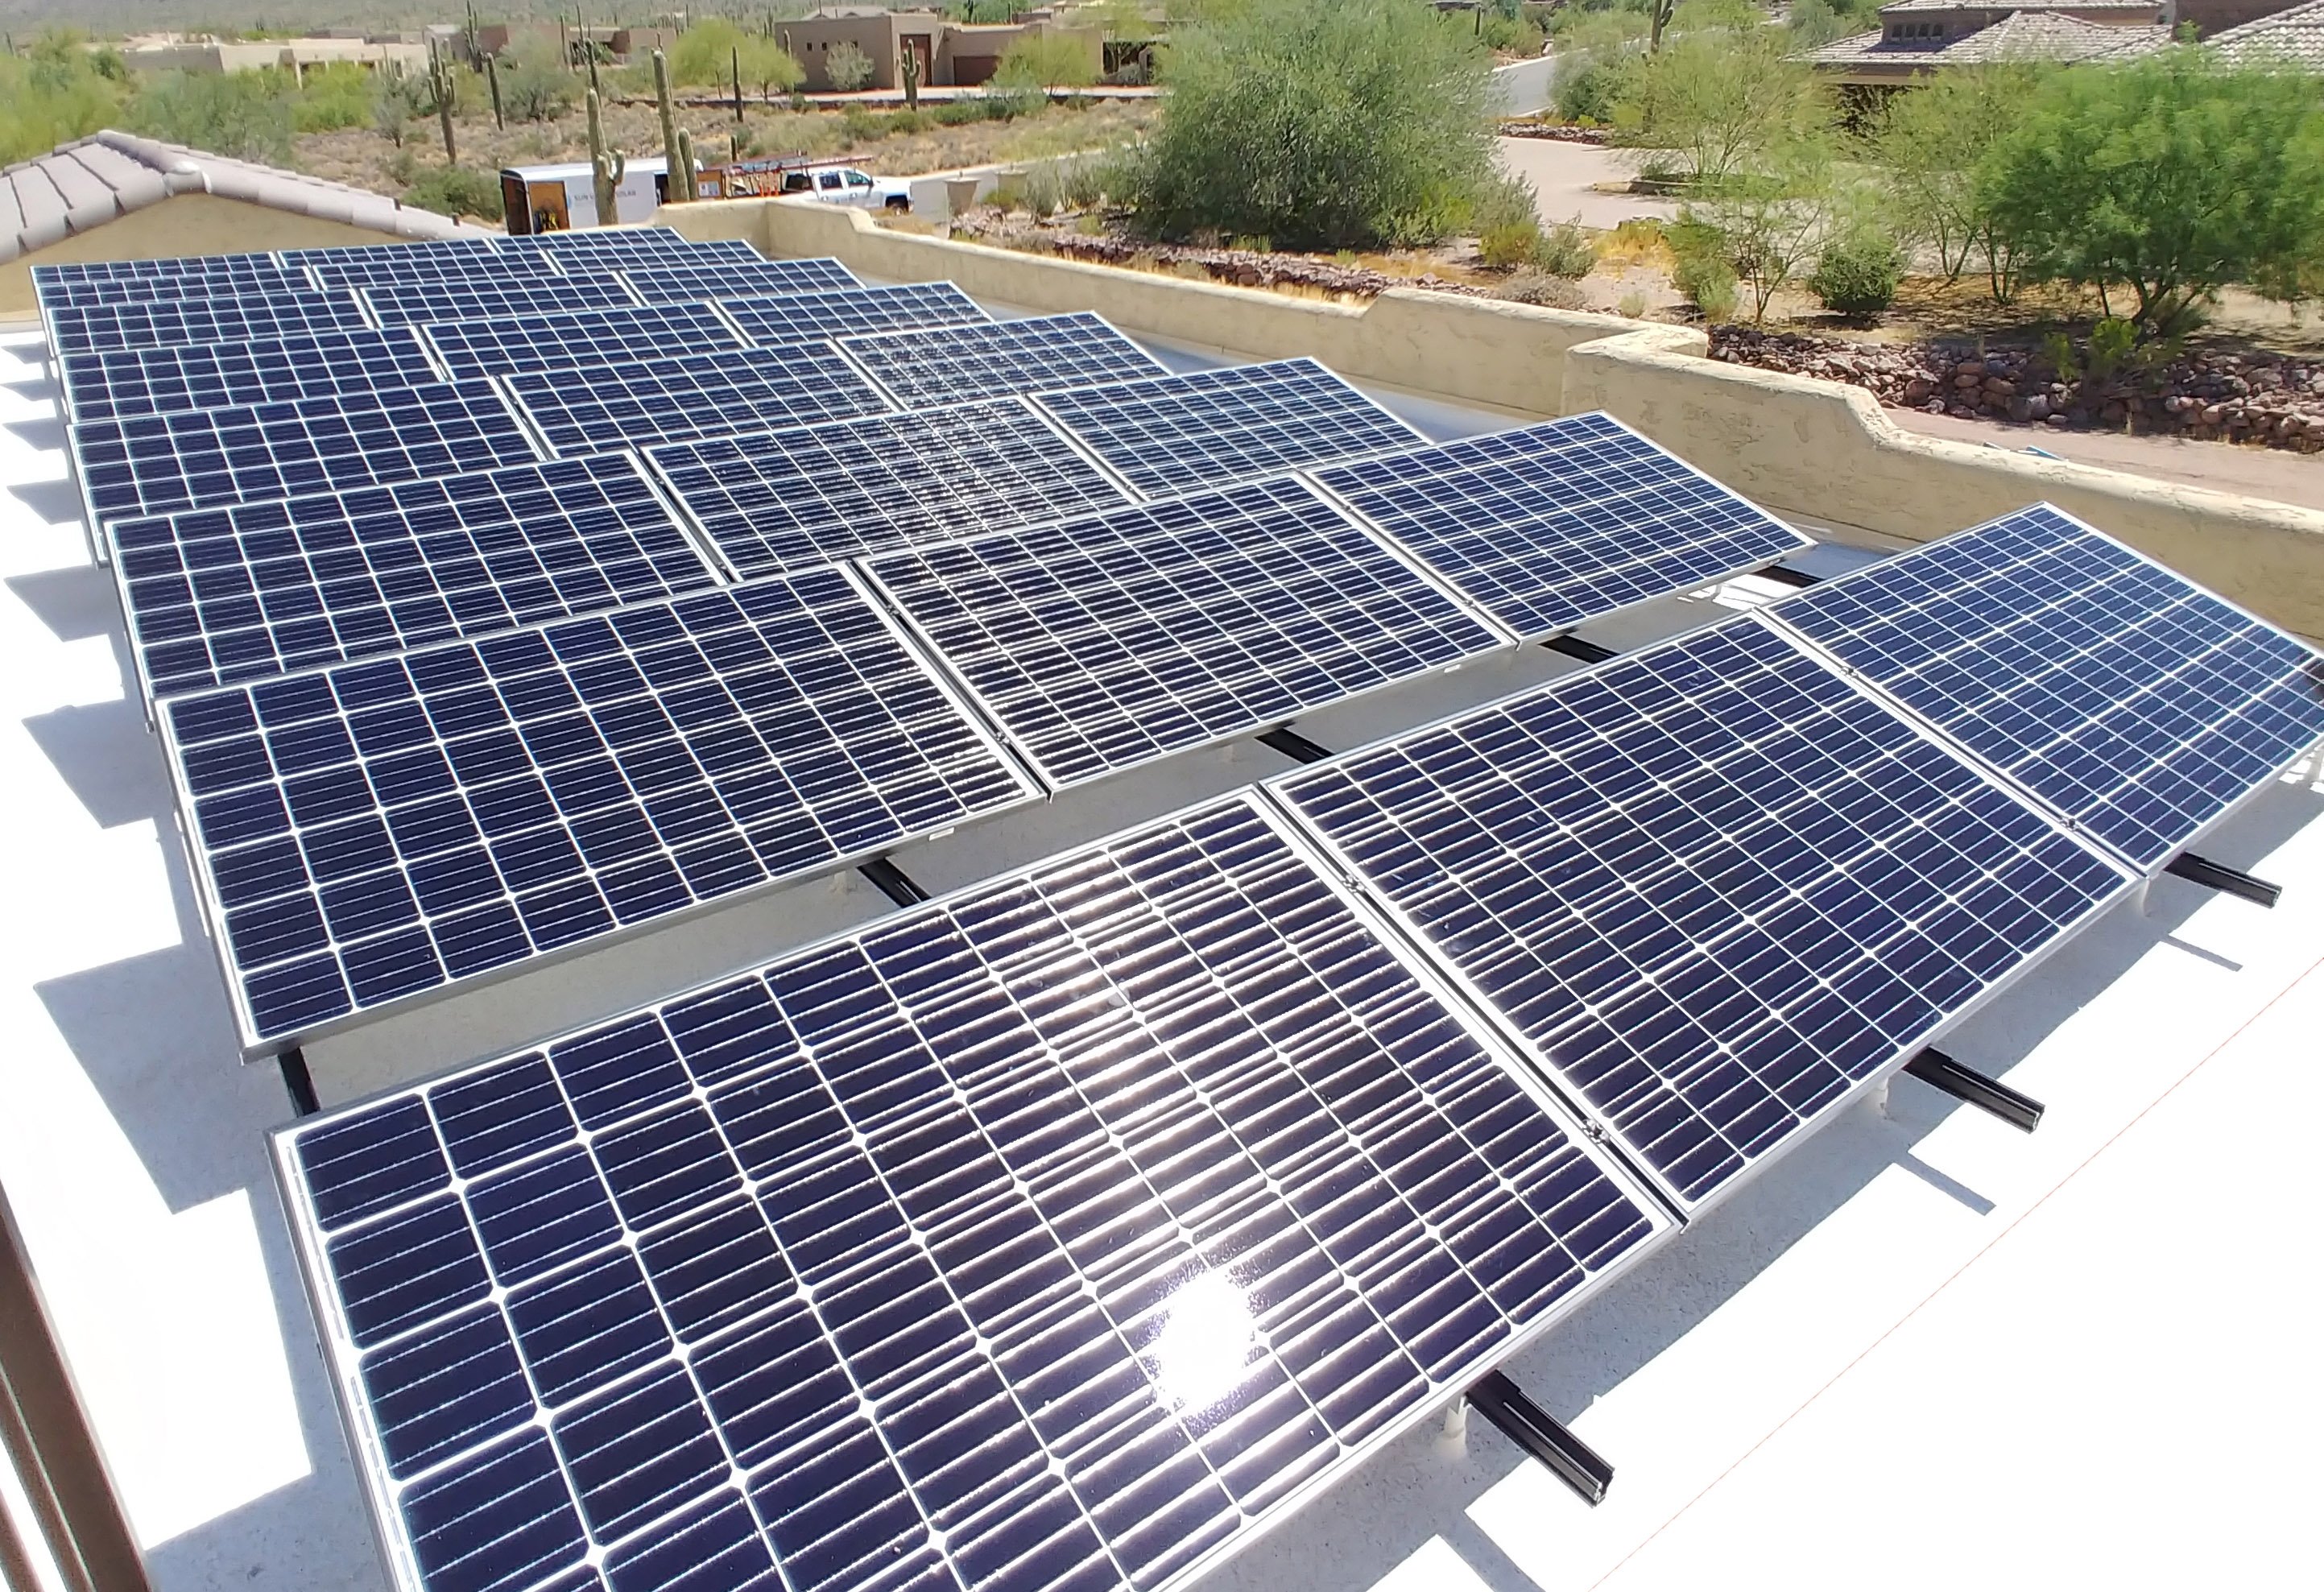 How Does Extreme Heat Impact Your Solar Array’s Production?